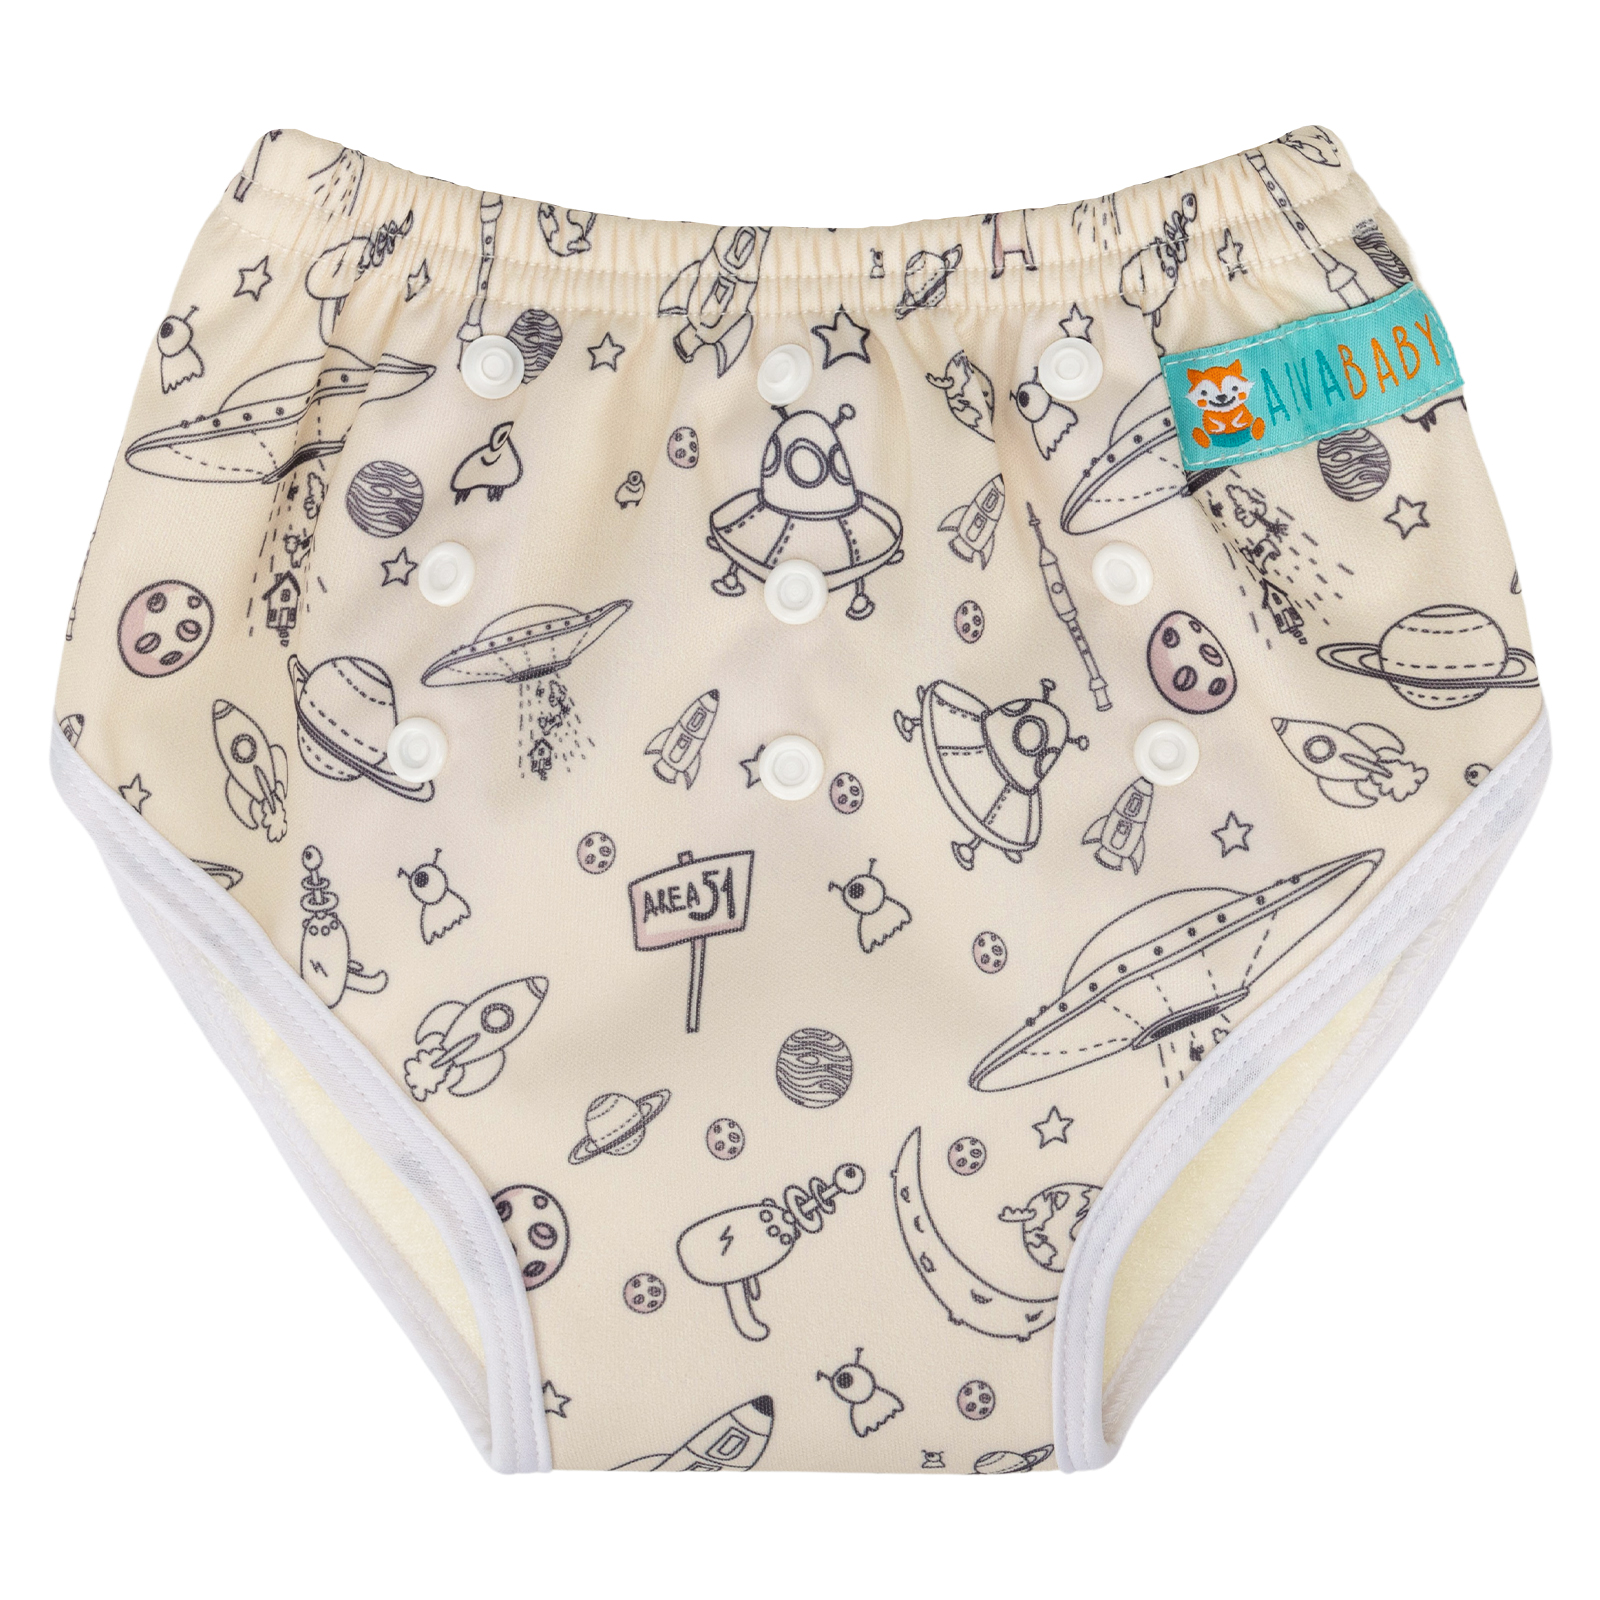 ALVABABY Printed Toddler Training Pant Training Underwear for Potty  Training (XYX35)